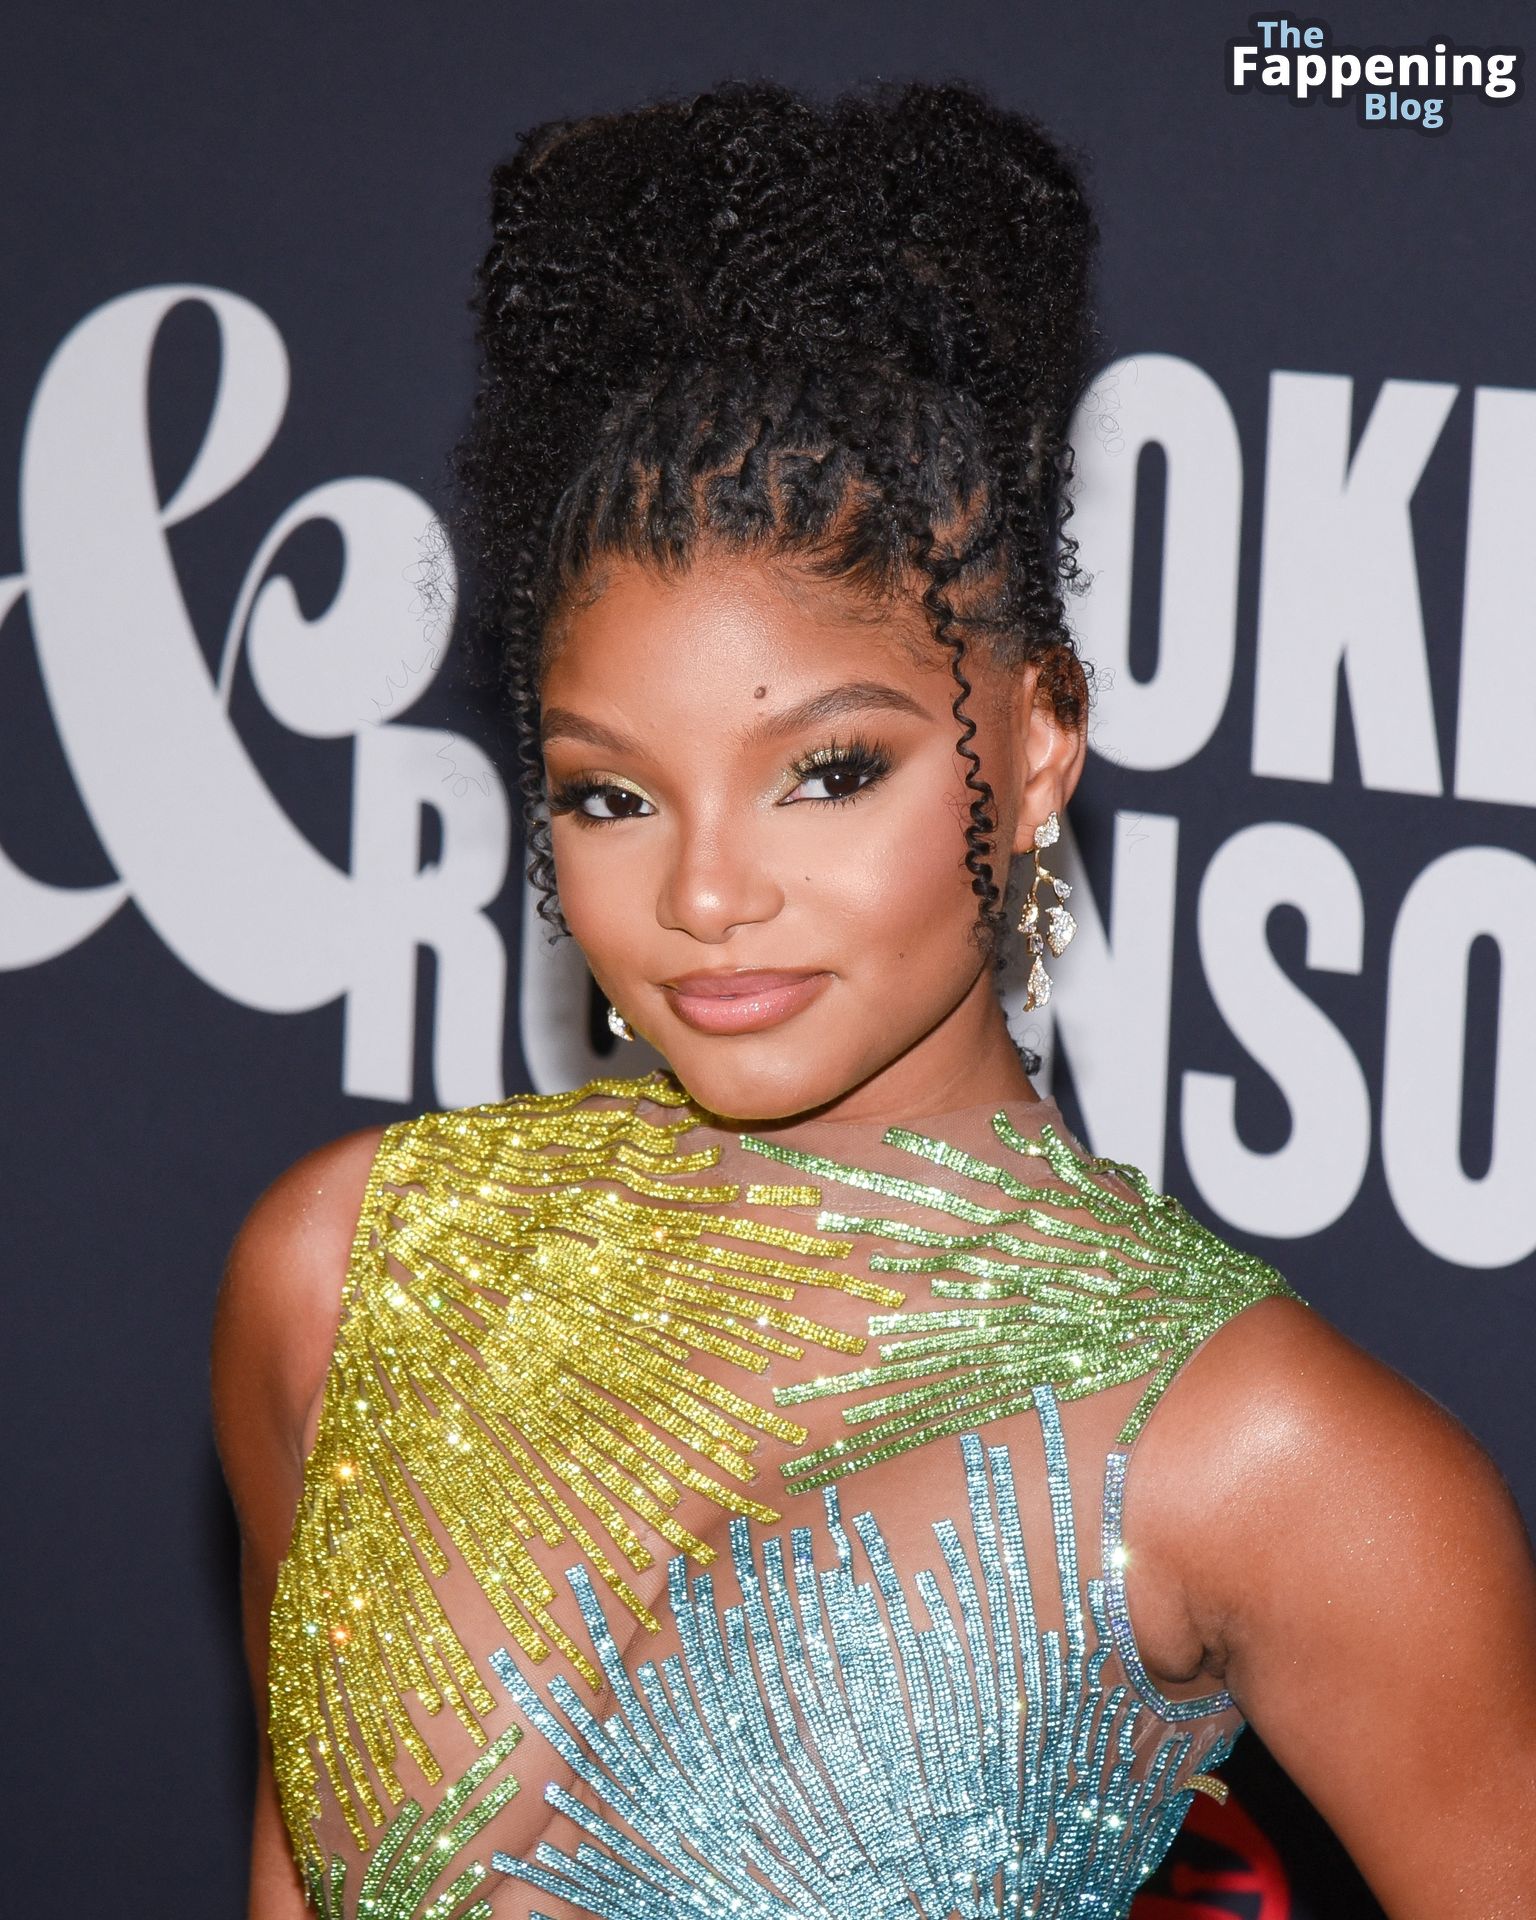 Halle Bailey &amp; Chloe Bailey Pose on the Red Carpet at the 2023 MusiCares Persons of the Year Gala (34 Photos)